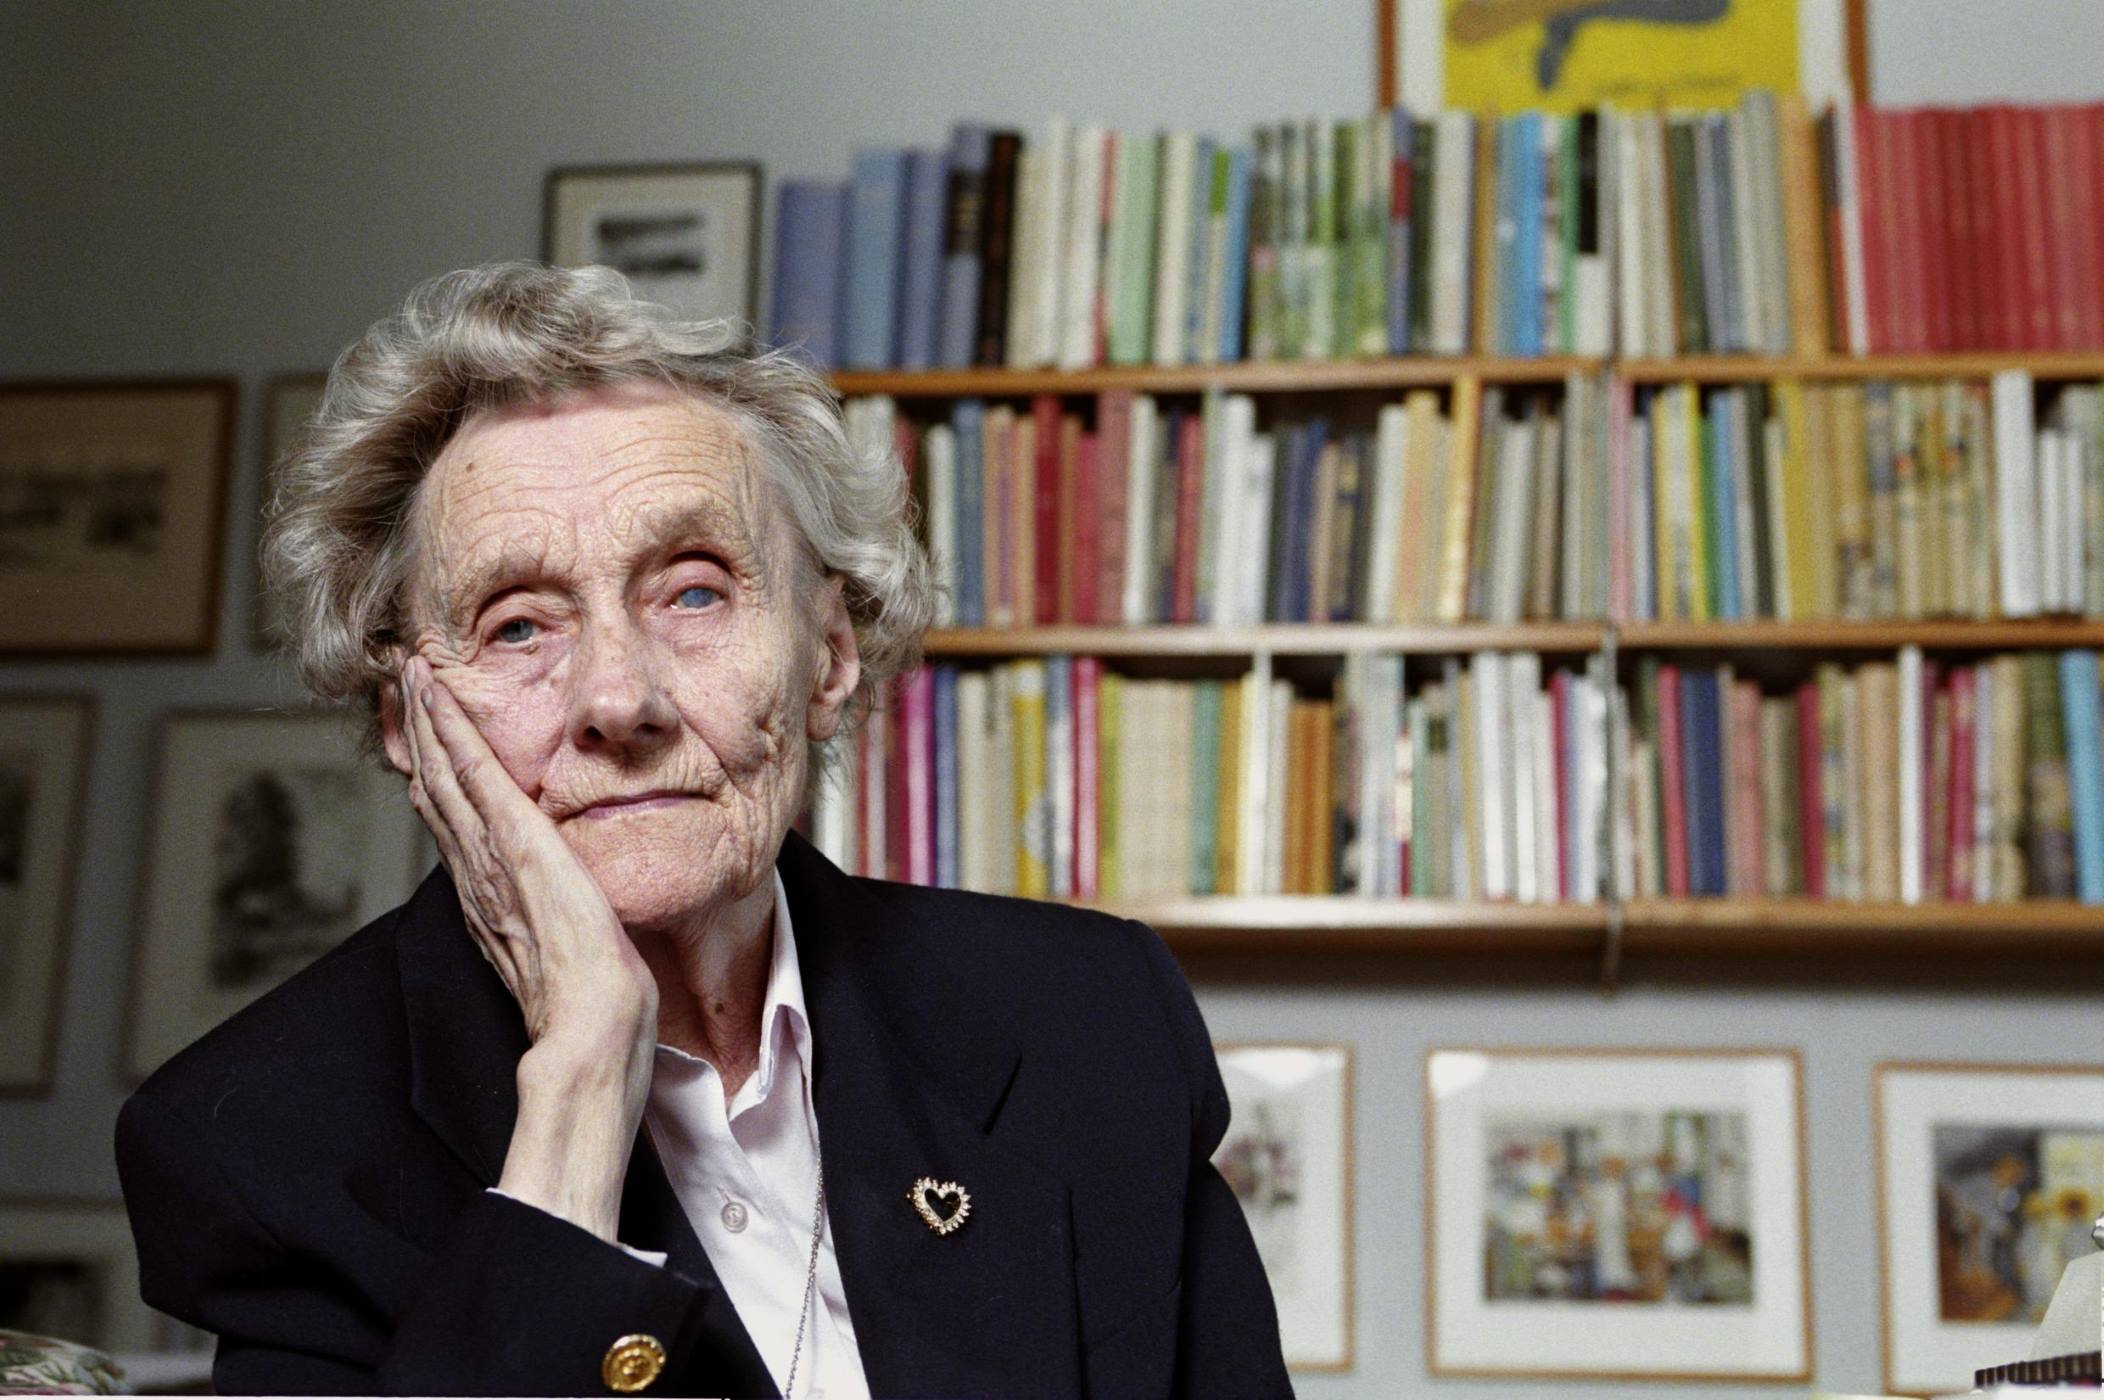 8 Enigmatic Facts About Astrid Lindgren - Facts.net